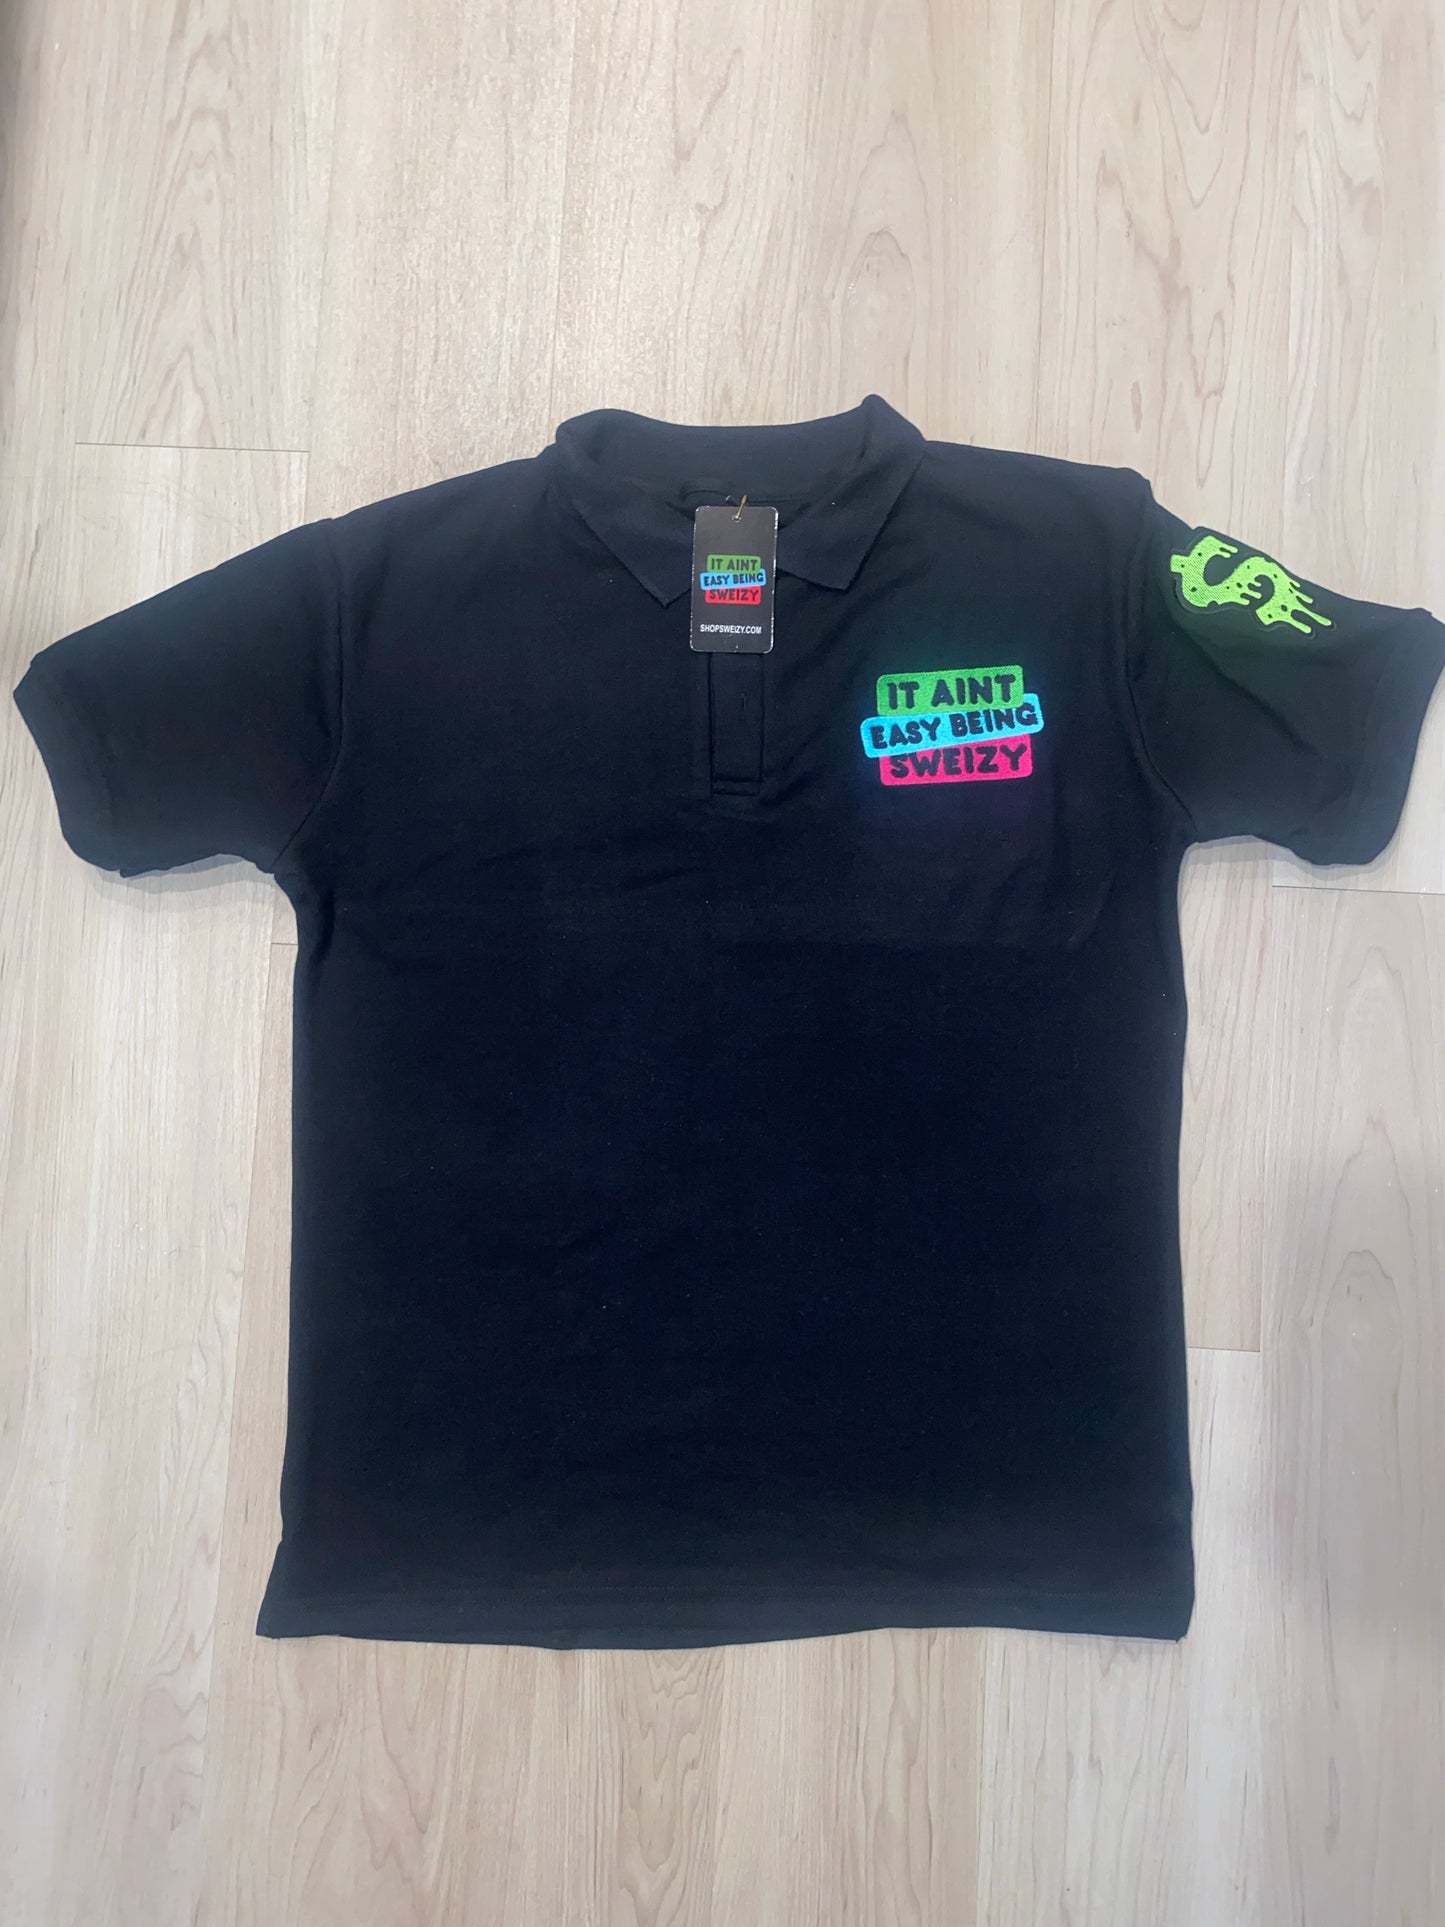 It Aint Easy Being Sweizy Polo T-Shirt